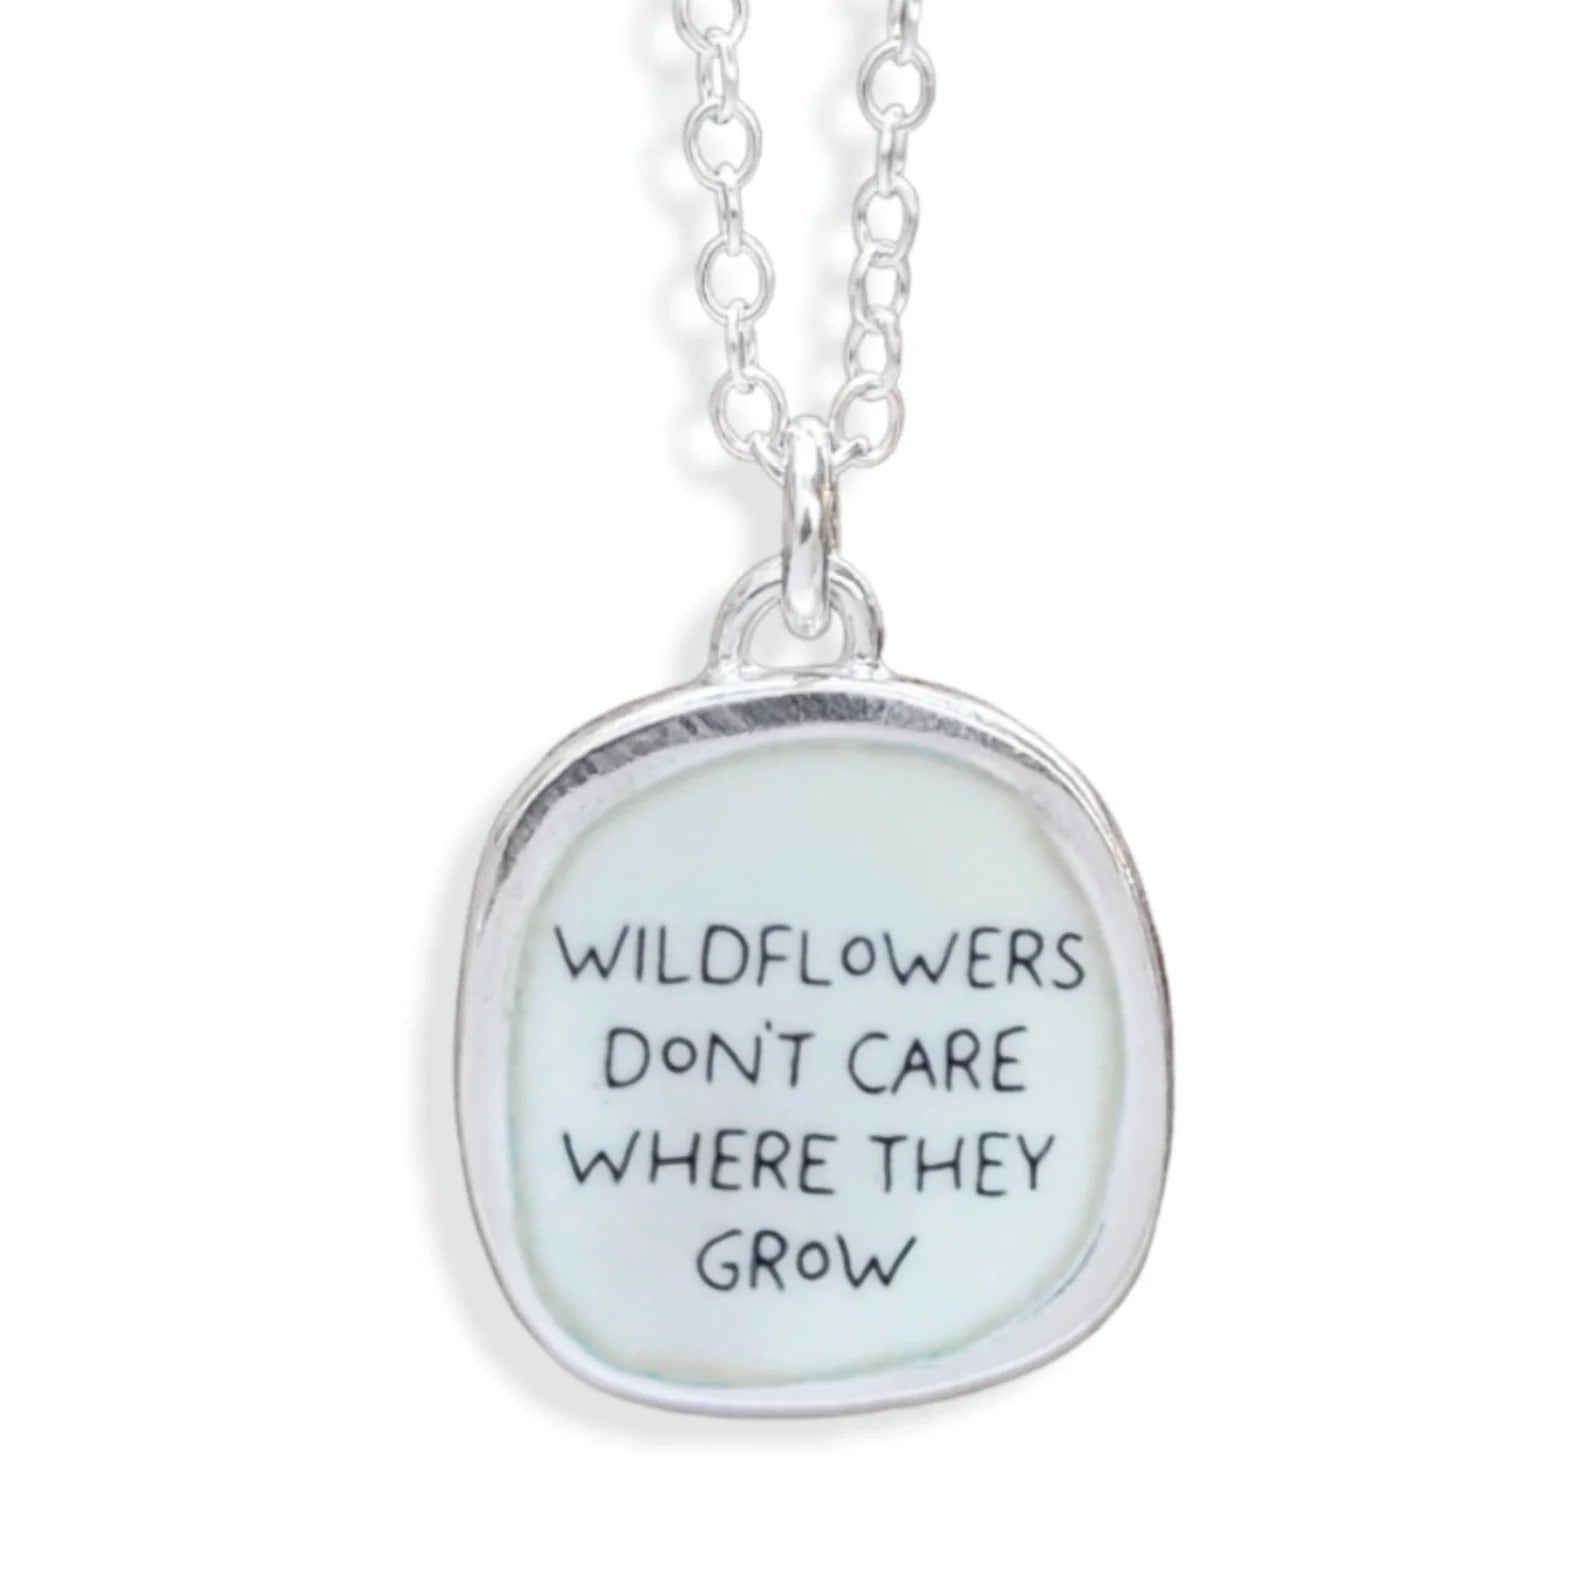 wildflowers don't care where they grow necklace